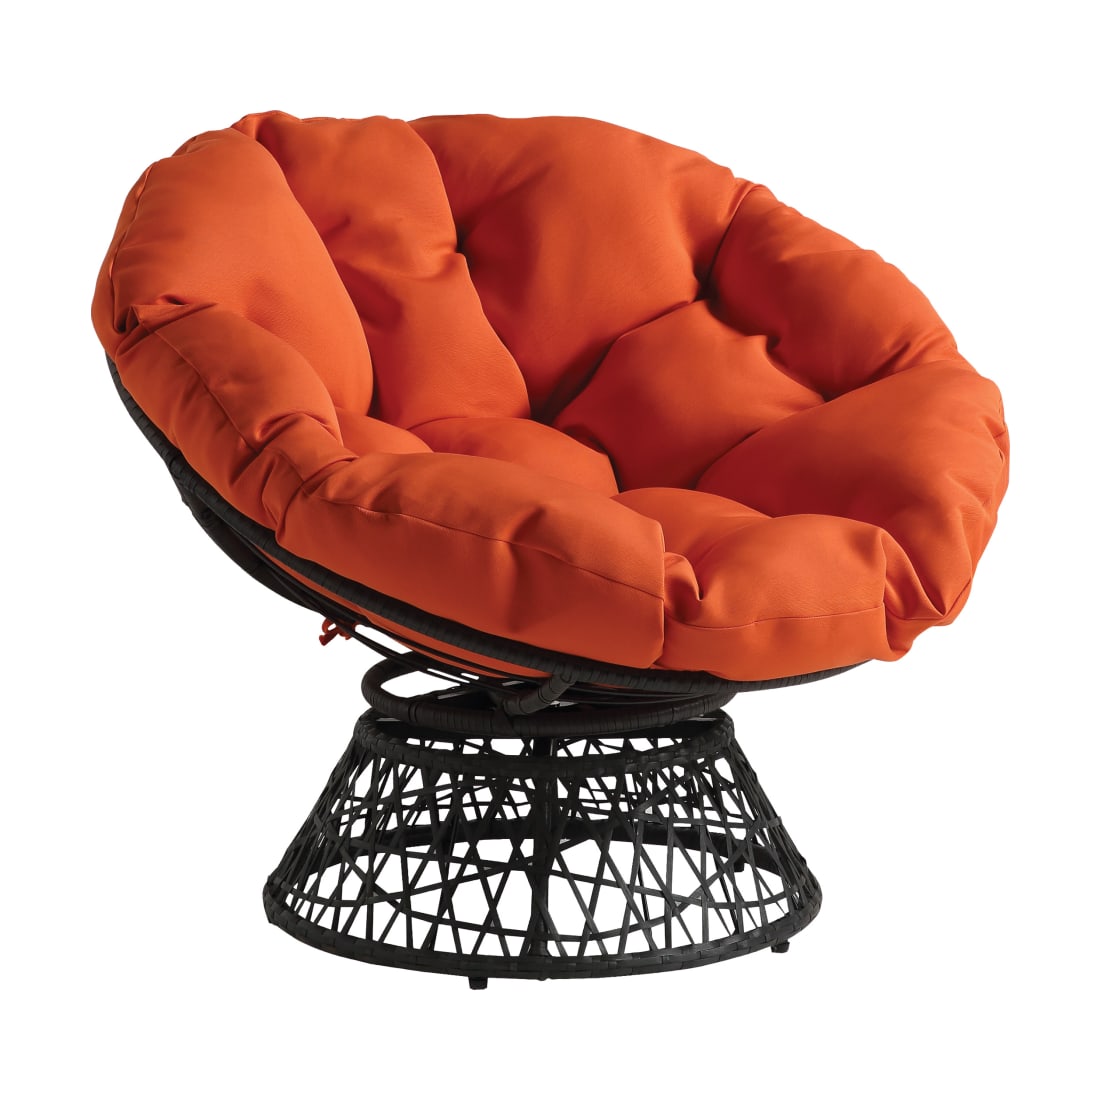 Papasan Chair with Orange cushion and Dark Gray Wicker Wrapped Frame